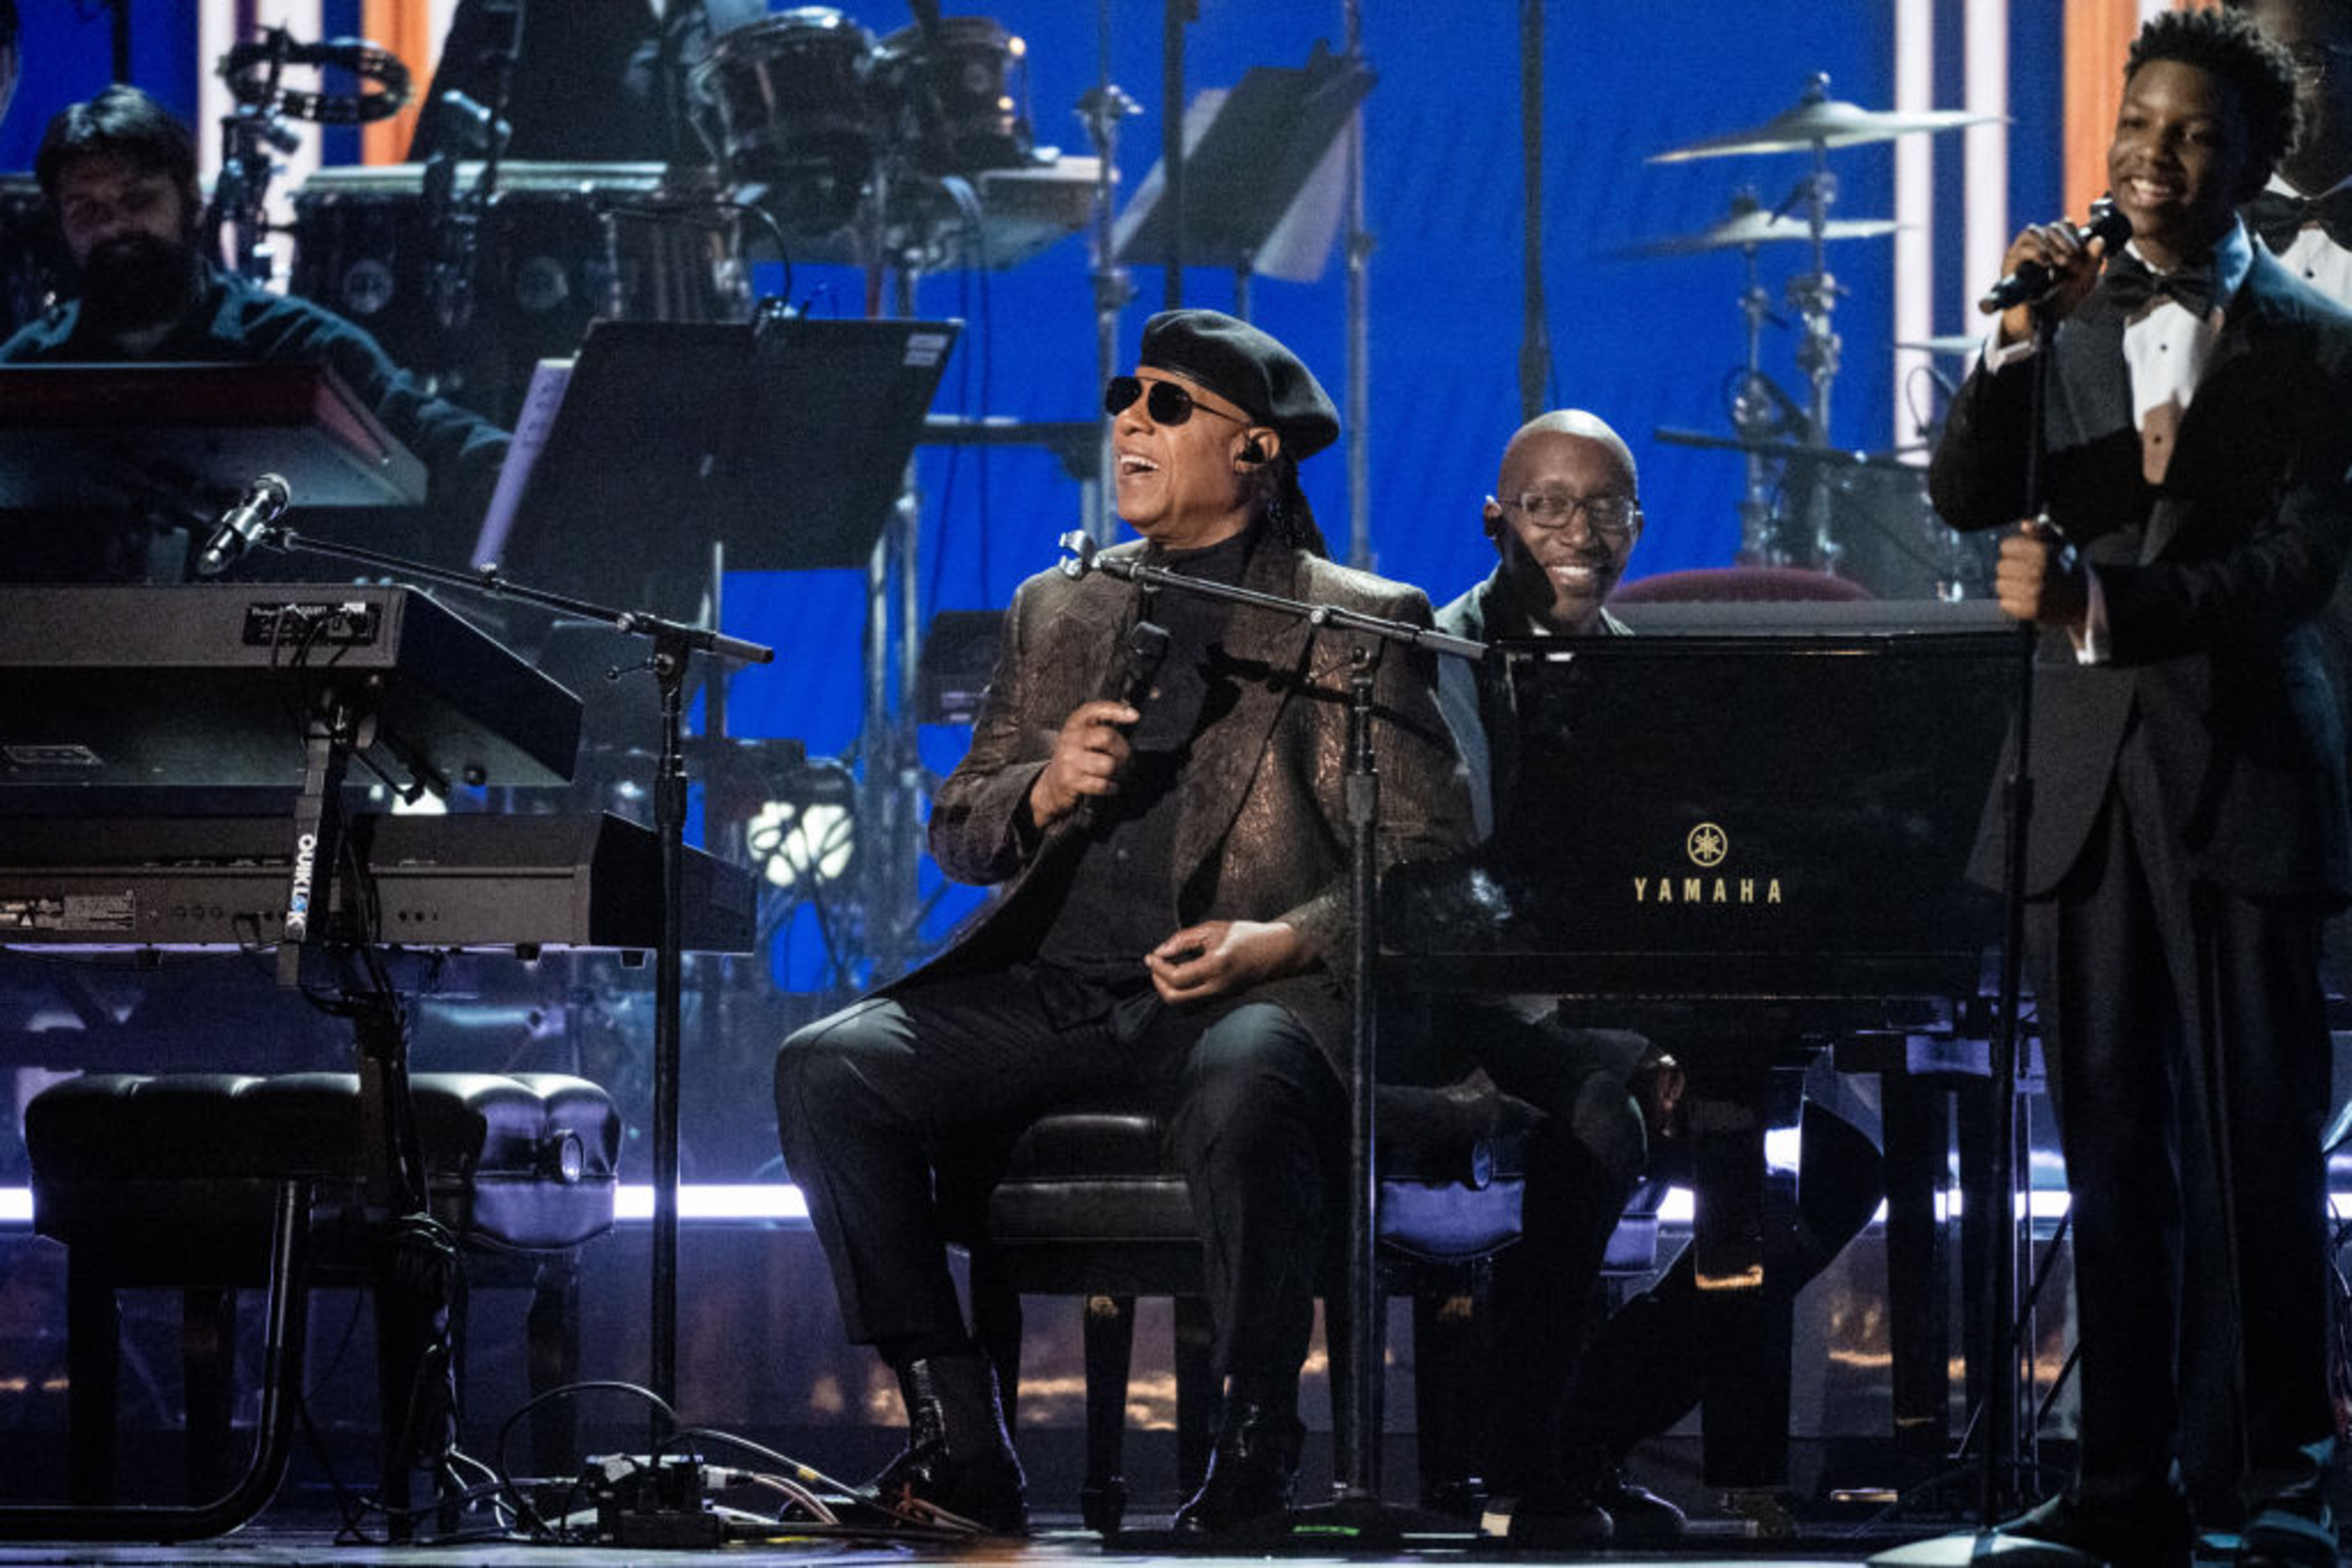 <p>Stevie Wonder is often praised for being one of the best songwriters of all time. His 1982 single “Ribbon in the Sky” helps showcase his songwriting talent and vocal ability in the form of a ballad. On the track, Wonder details how long he waited to find that special person and he believes their love is written in the stars. </p><p>You may also like: <a href='https://www.yardbarker.com/entertainment/articles/20_facts_you_might_not_know_about_gladiator_100123/s1__35259995'>20 facts you might not know about 'Gladiator'</a></p>